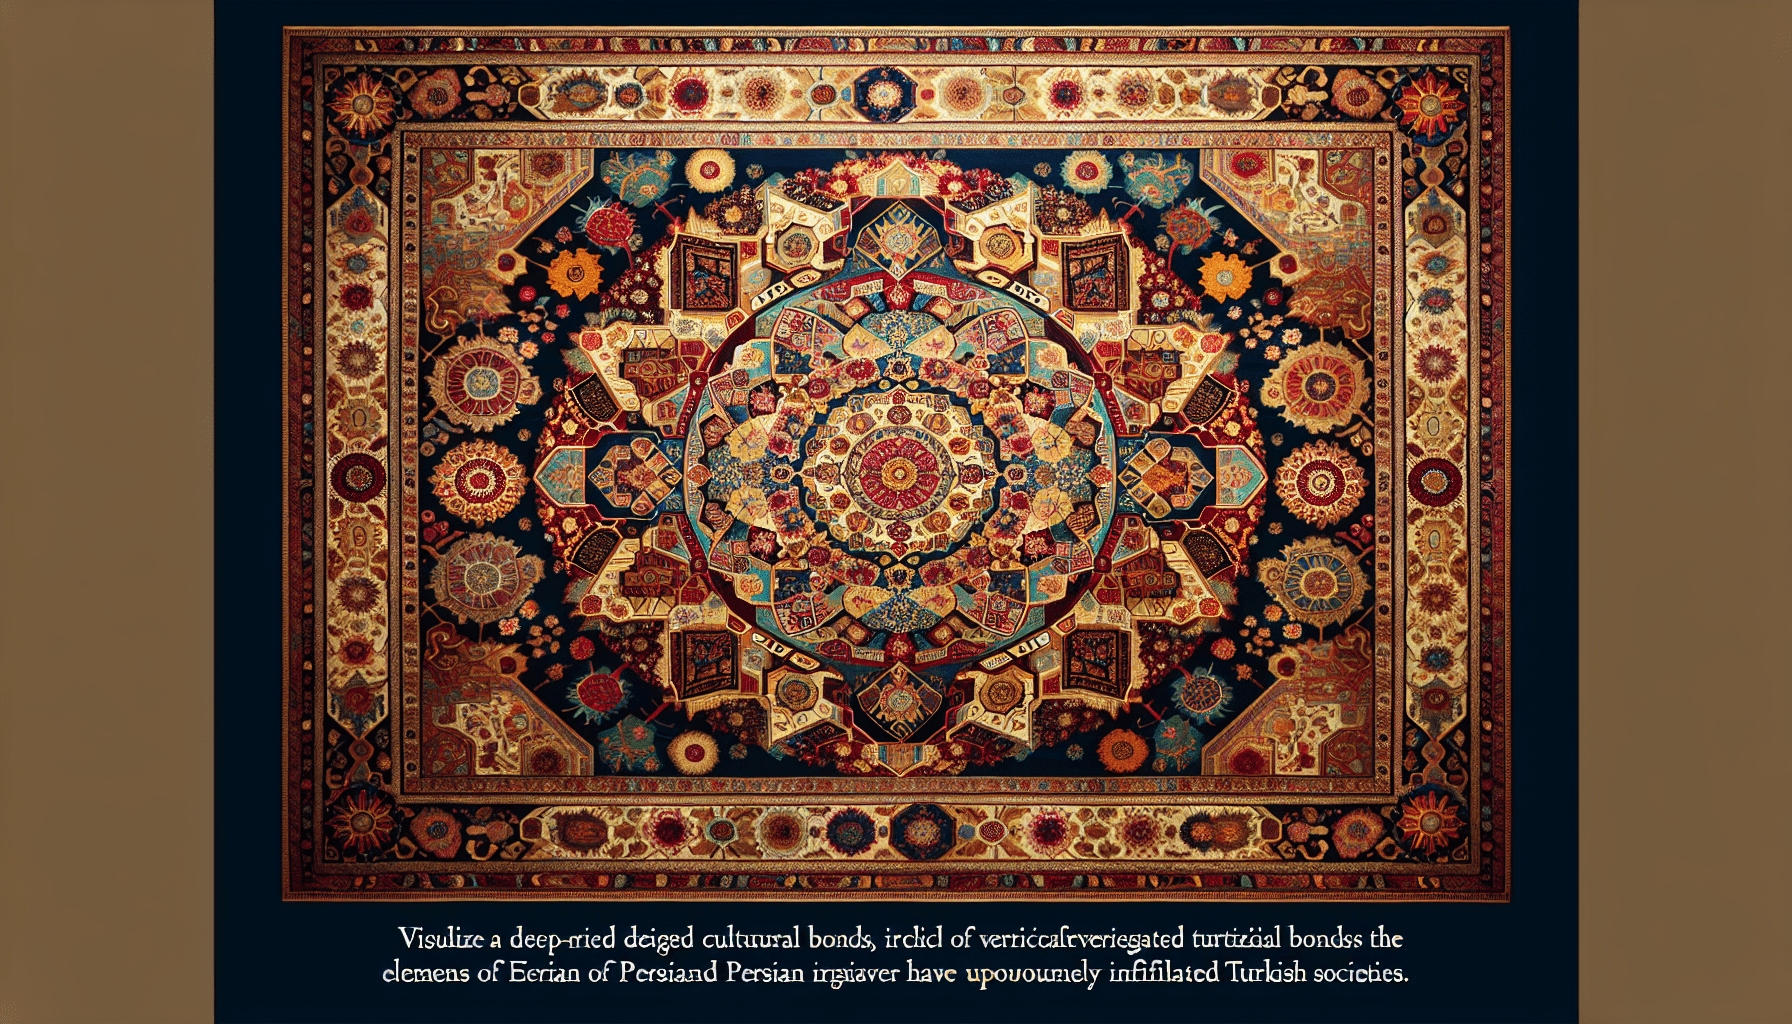 An intricate circular Persian rug design with dense, colorful geometric and floral motifs. Text below discusses the historical influence of Persian design on Turkish culture, highlighting how these rich patterns have also shaped traditional rugs in Turkey.